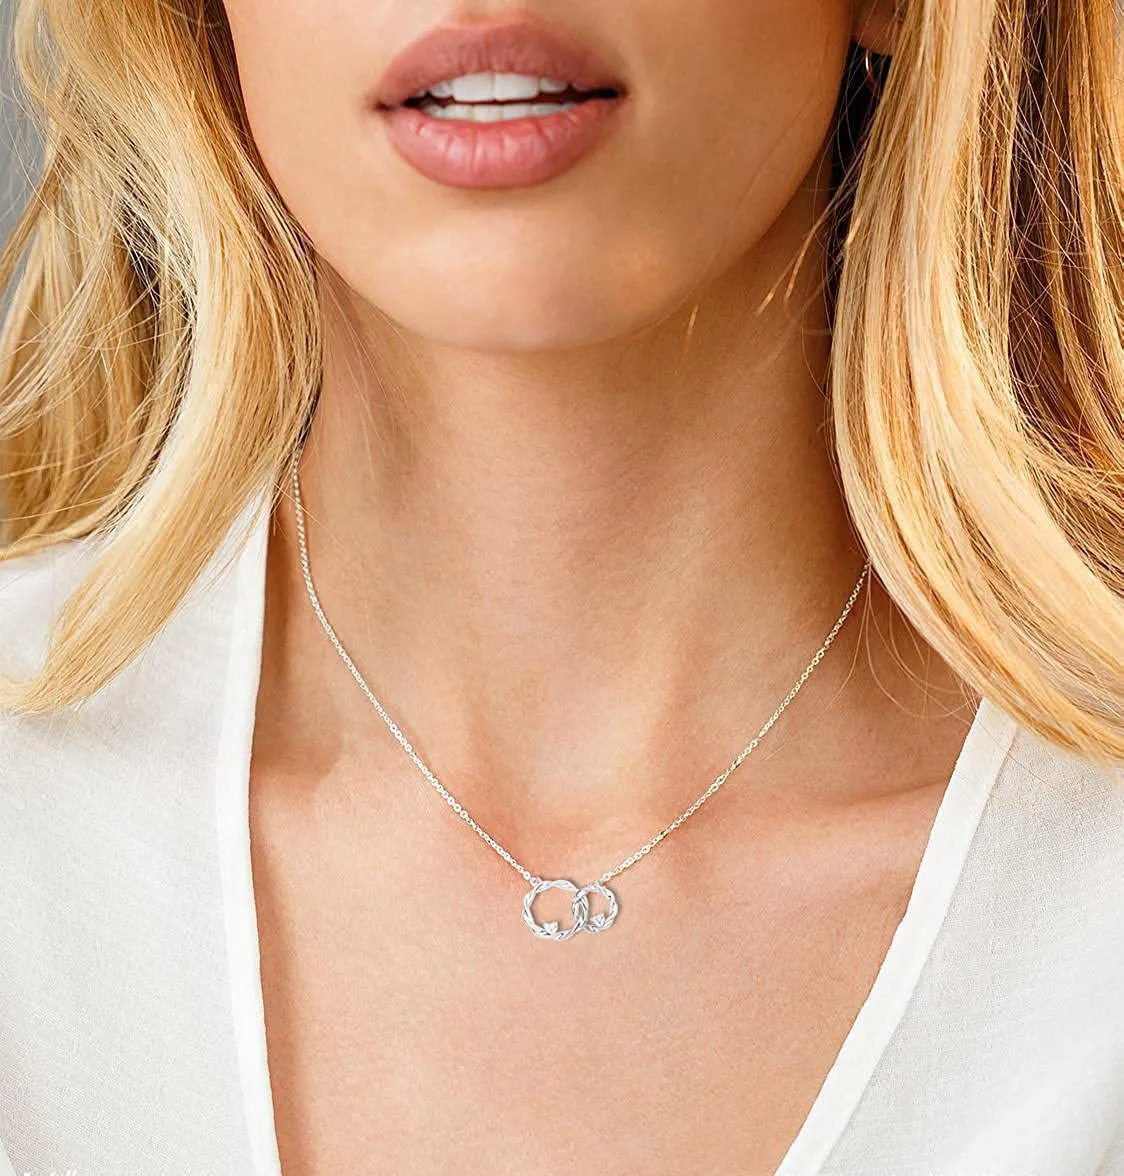 Double Ring Twist Necklace Female Europe och USA Simple Ring Ring Pendant Collarbone Chain